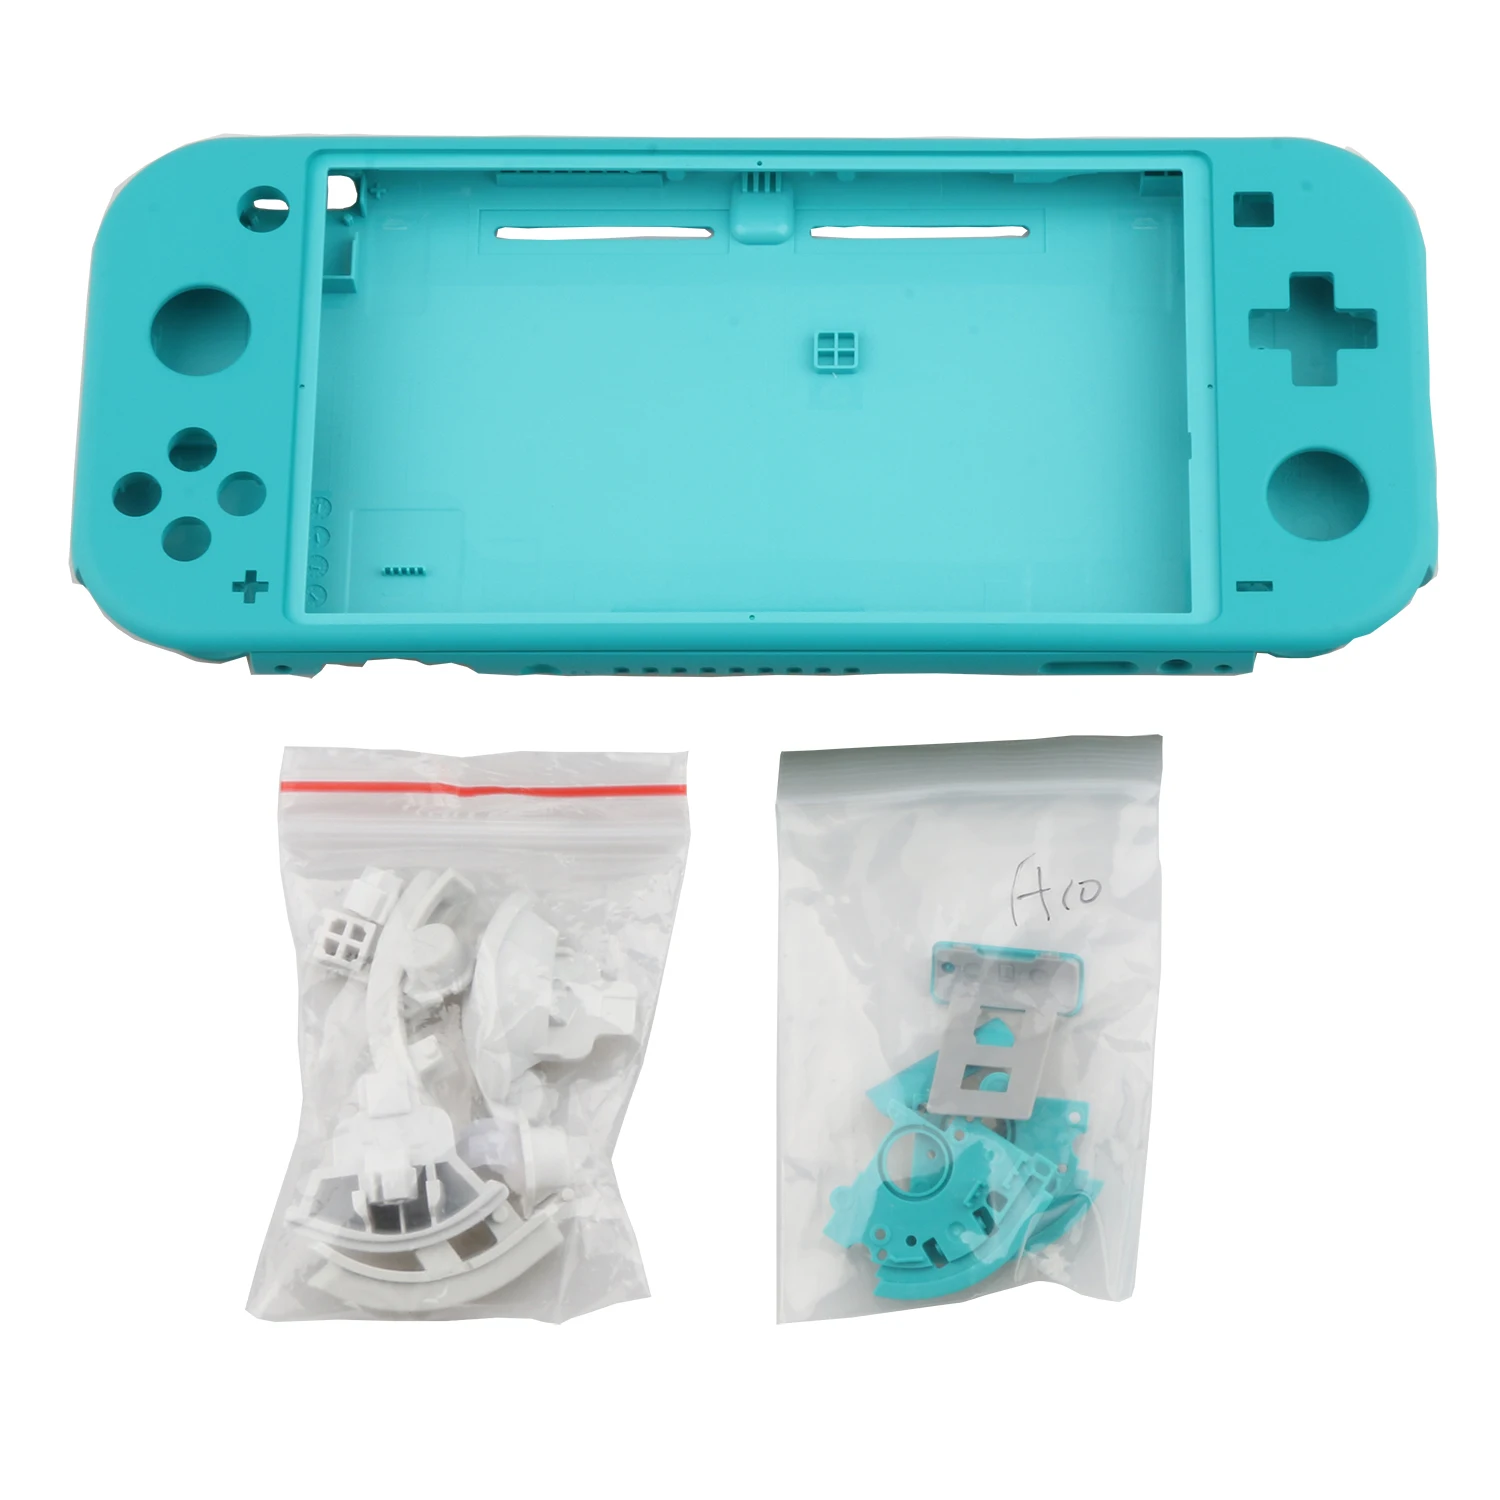 Housing Shell For Switch Lite Console Case With Button Hard Replacement Case Cover Repair Parts enlarge